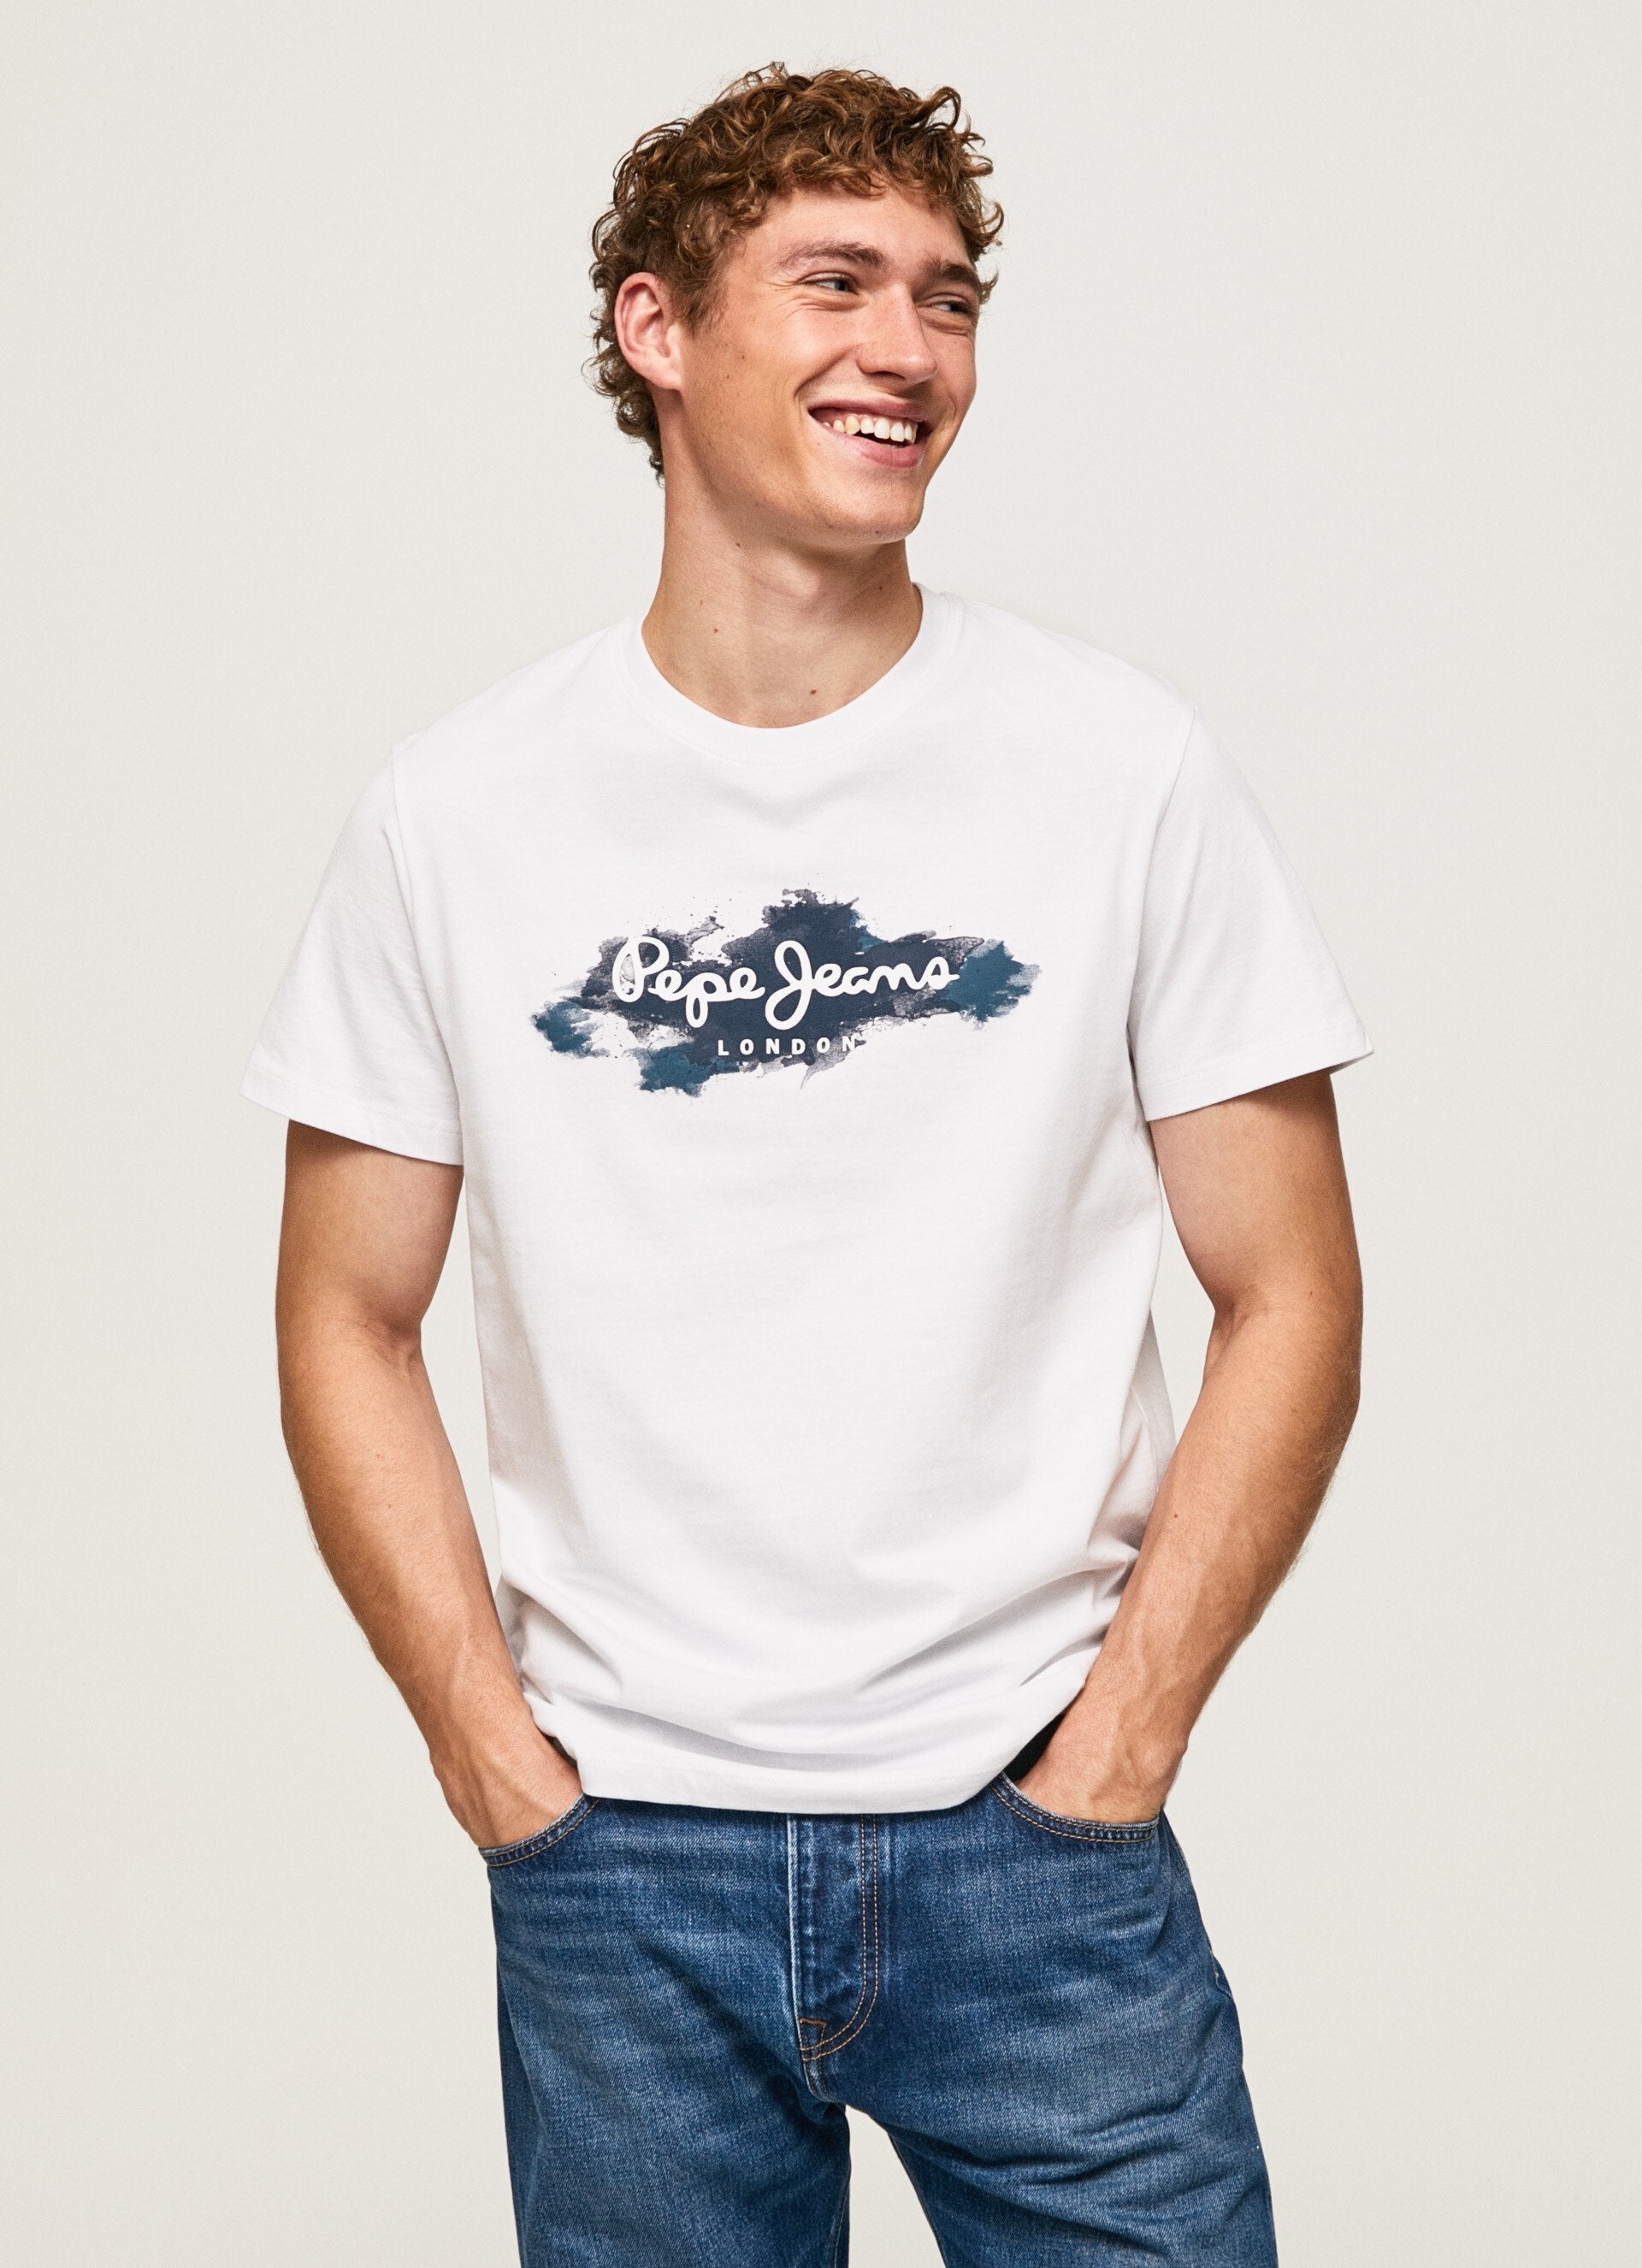 PEPE JEANS LONDON OLDWIVE REGULAR | WHITE FIT T-SHIRT